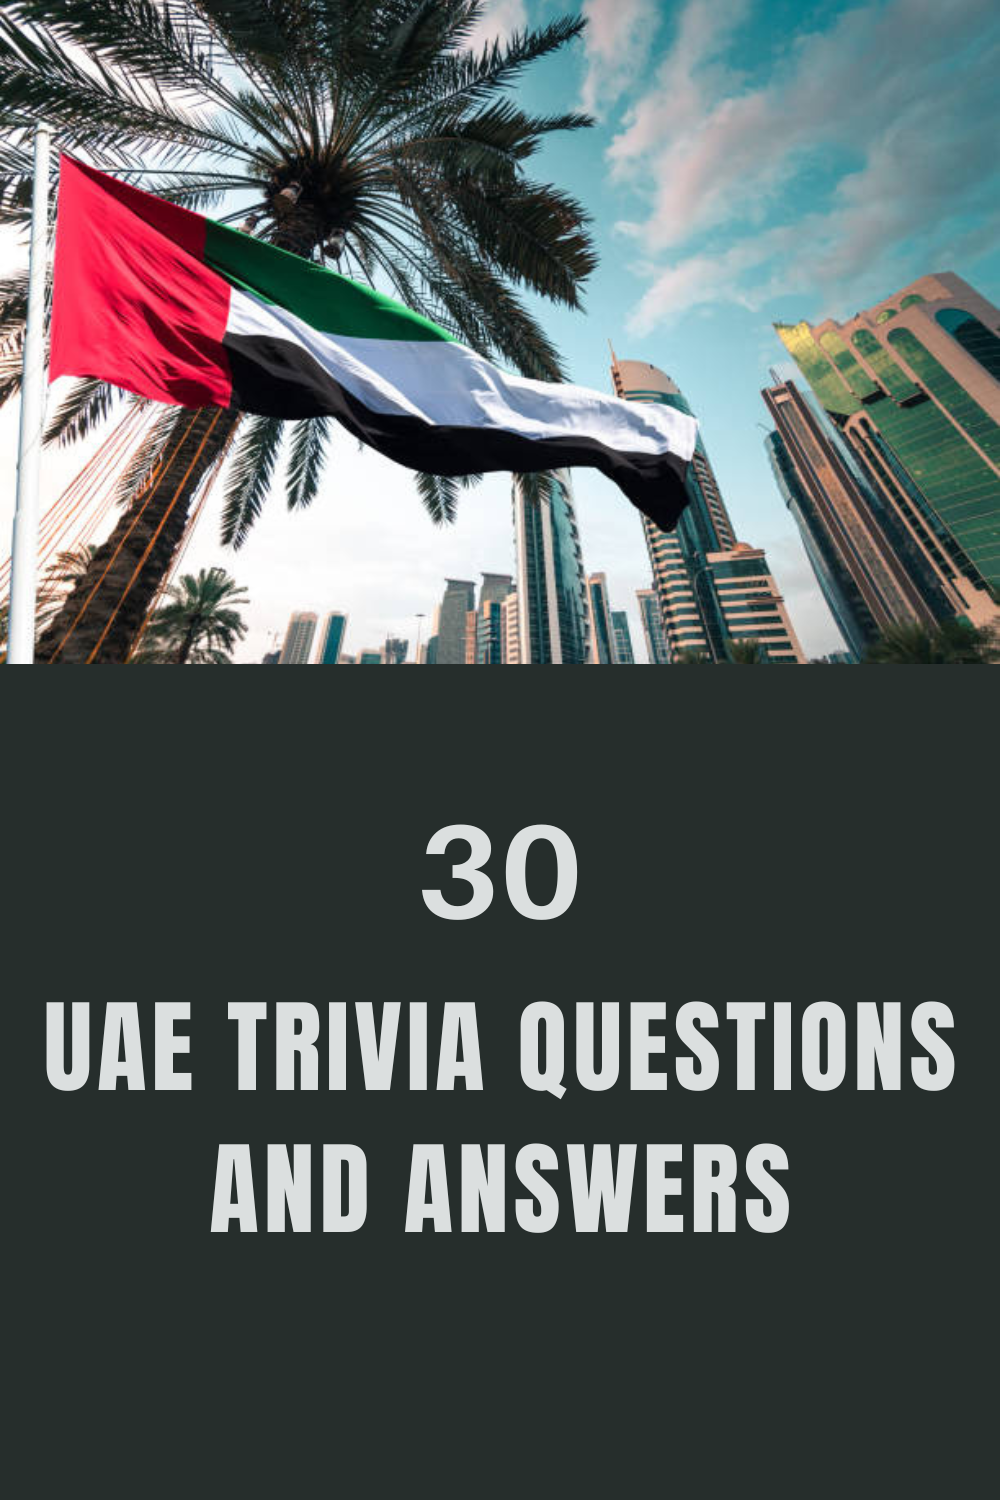 30 UAE Trivia Questions and Answers